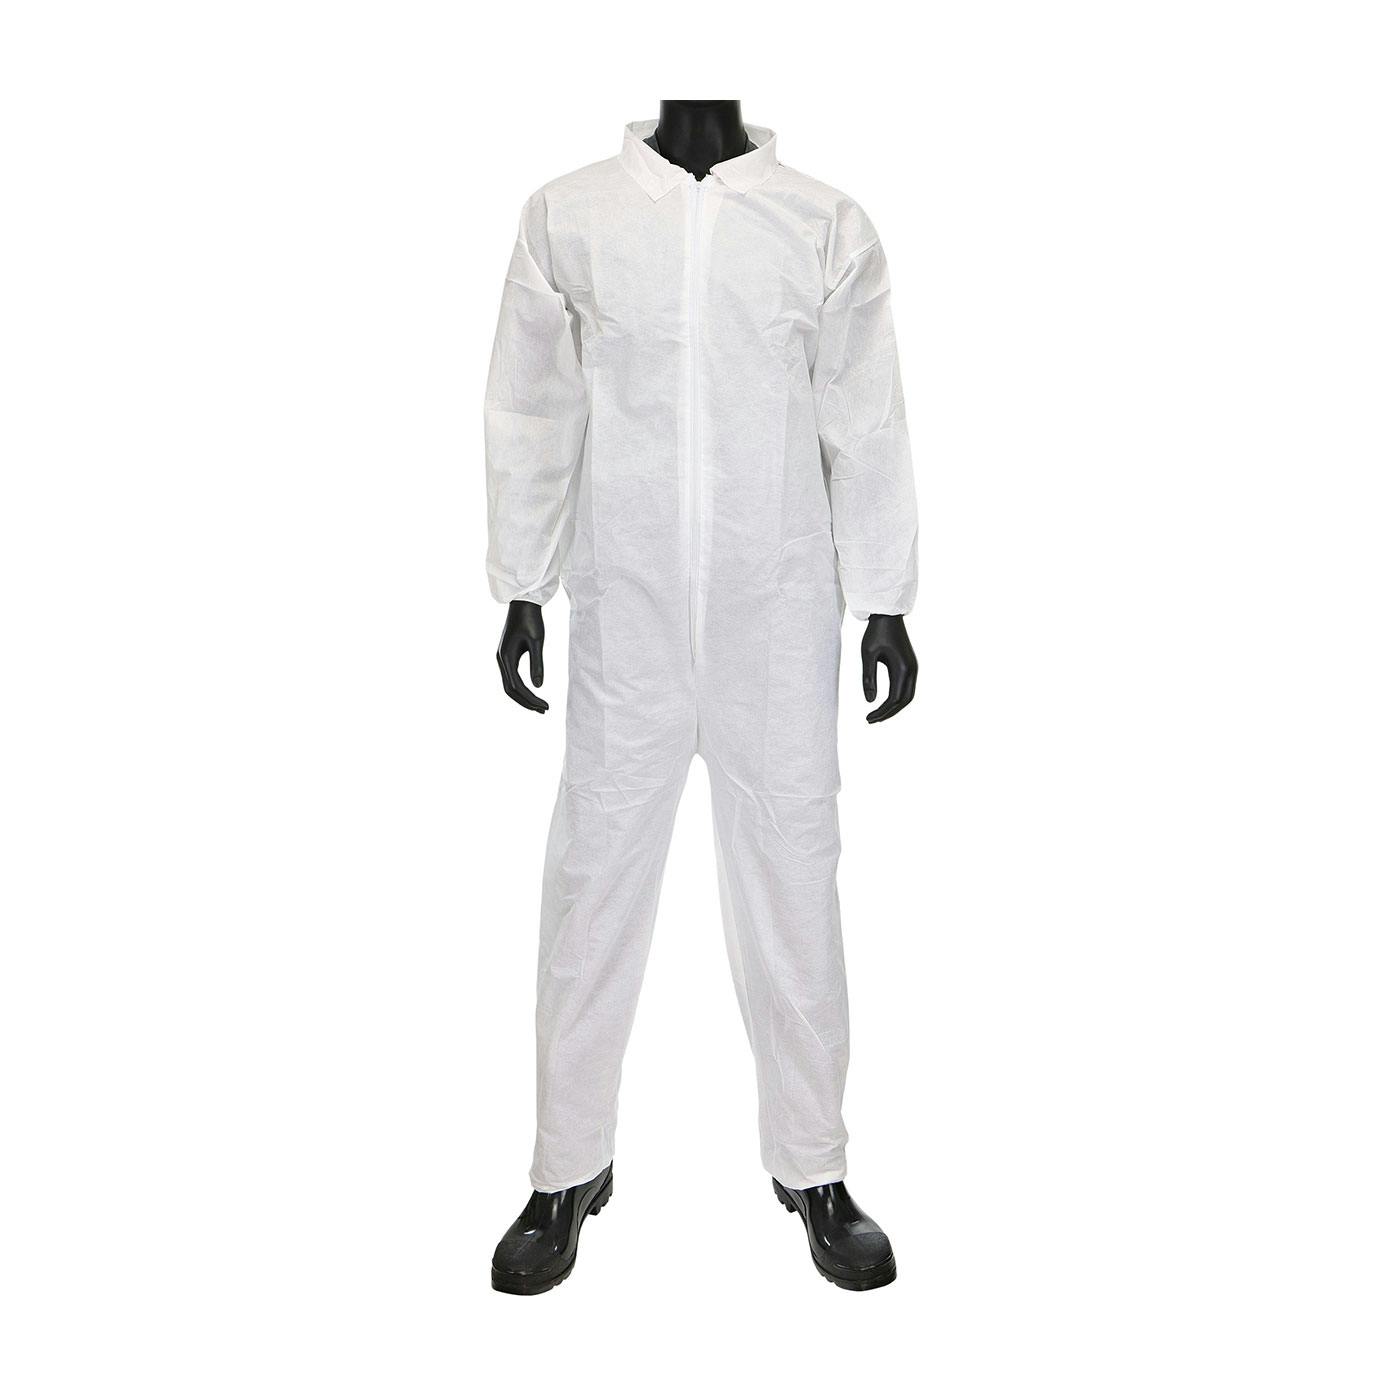 SMS - Coverall with Elastic Wrist & Ankle 42 gsm, White (C3852)_0